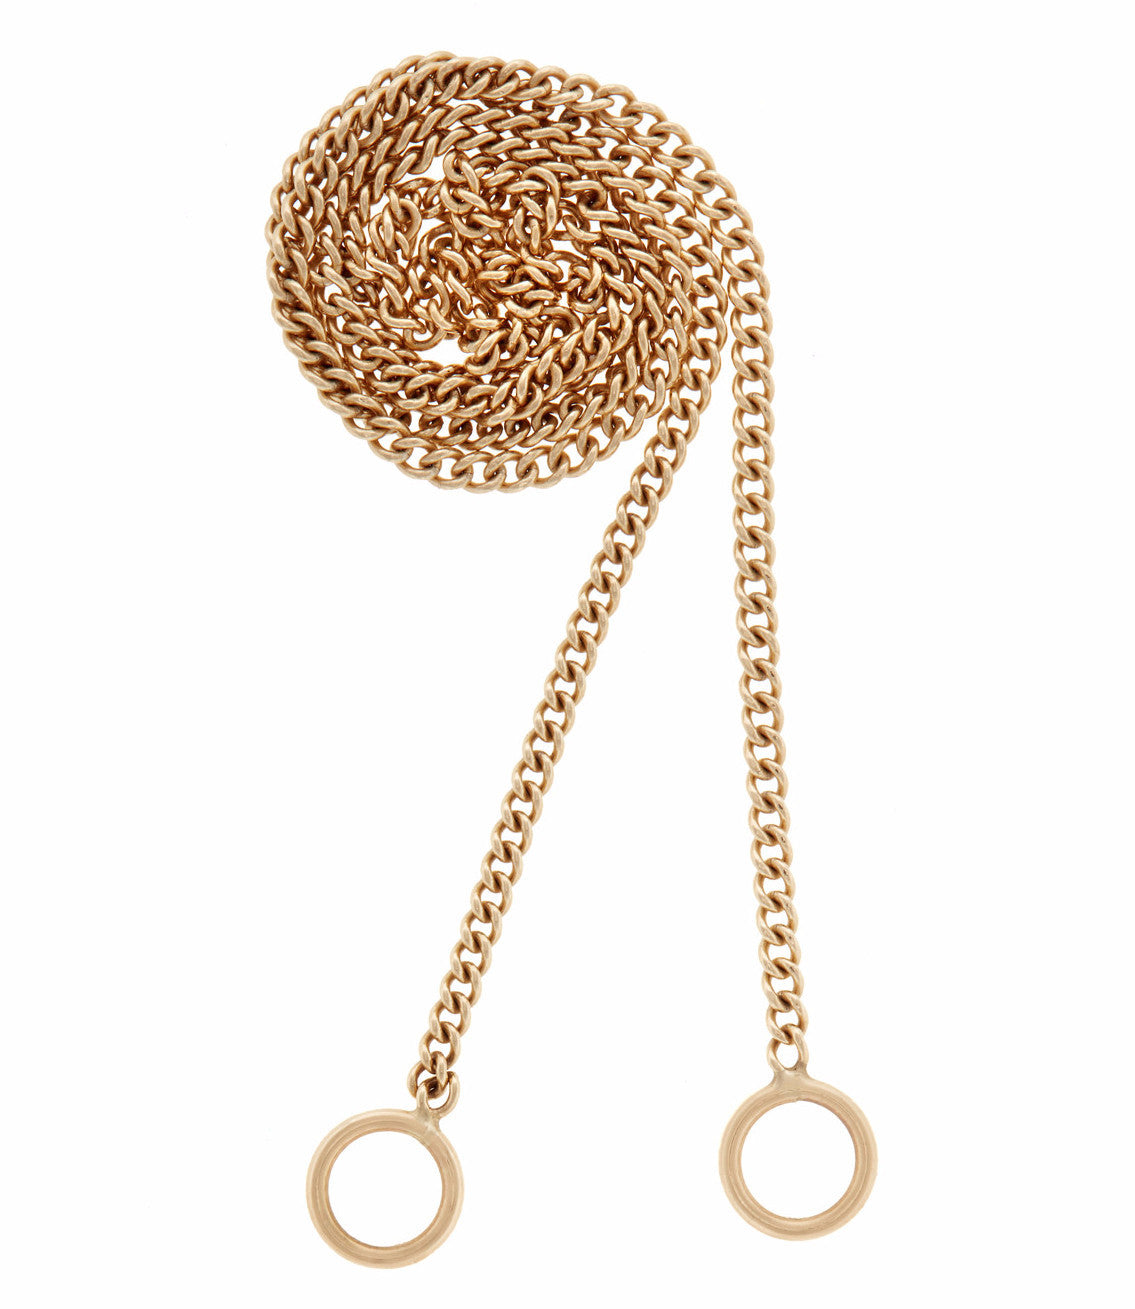 Curled up gold chain necklace